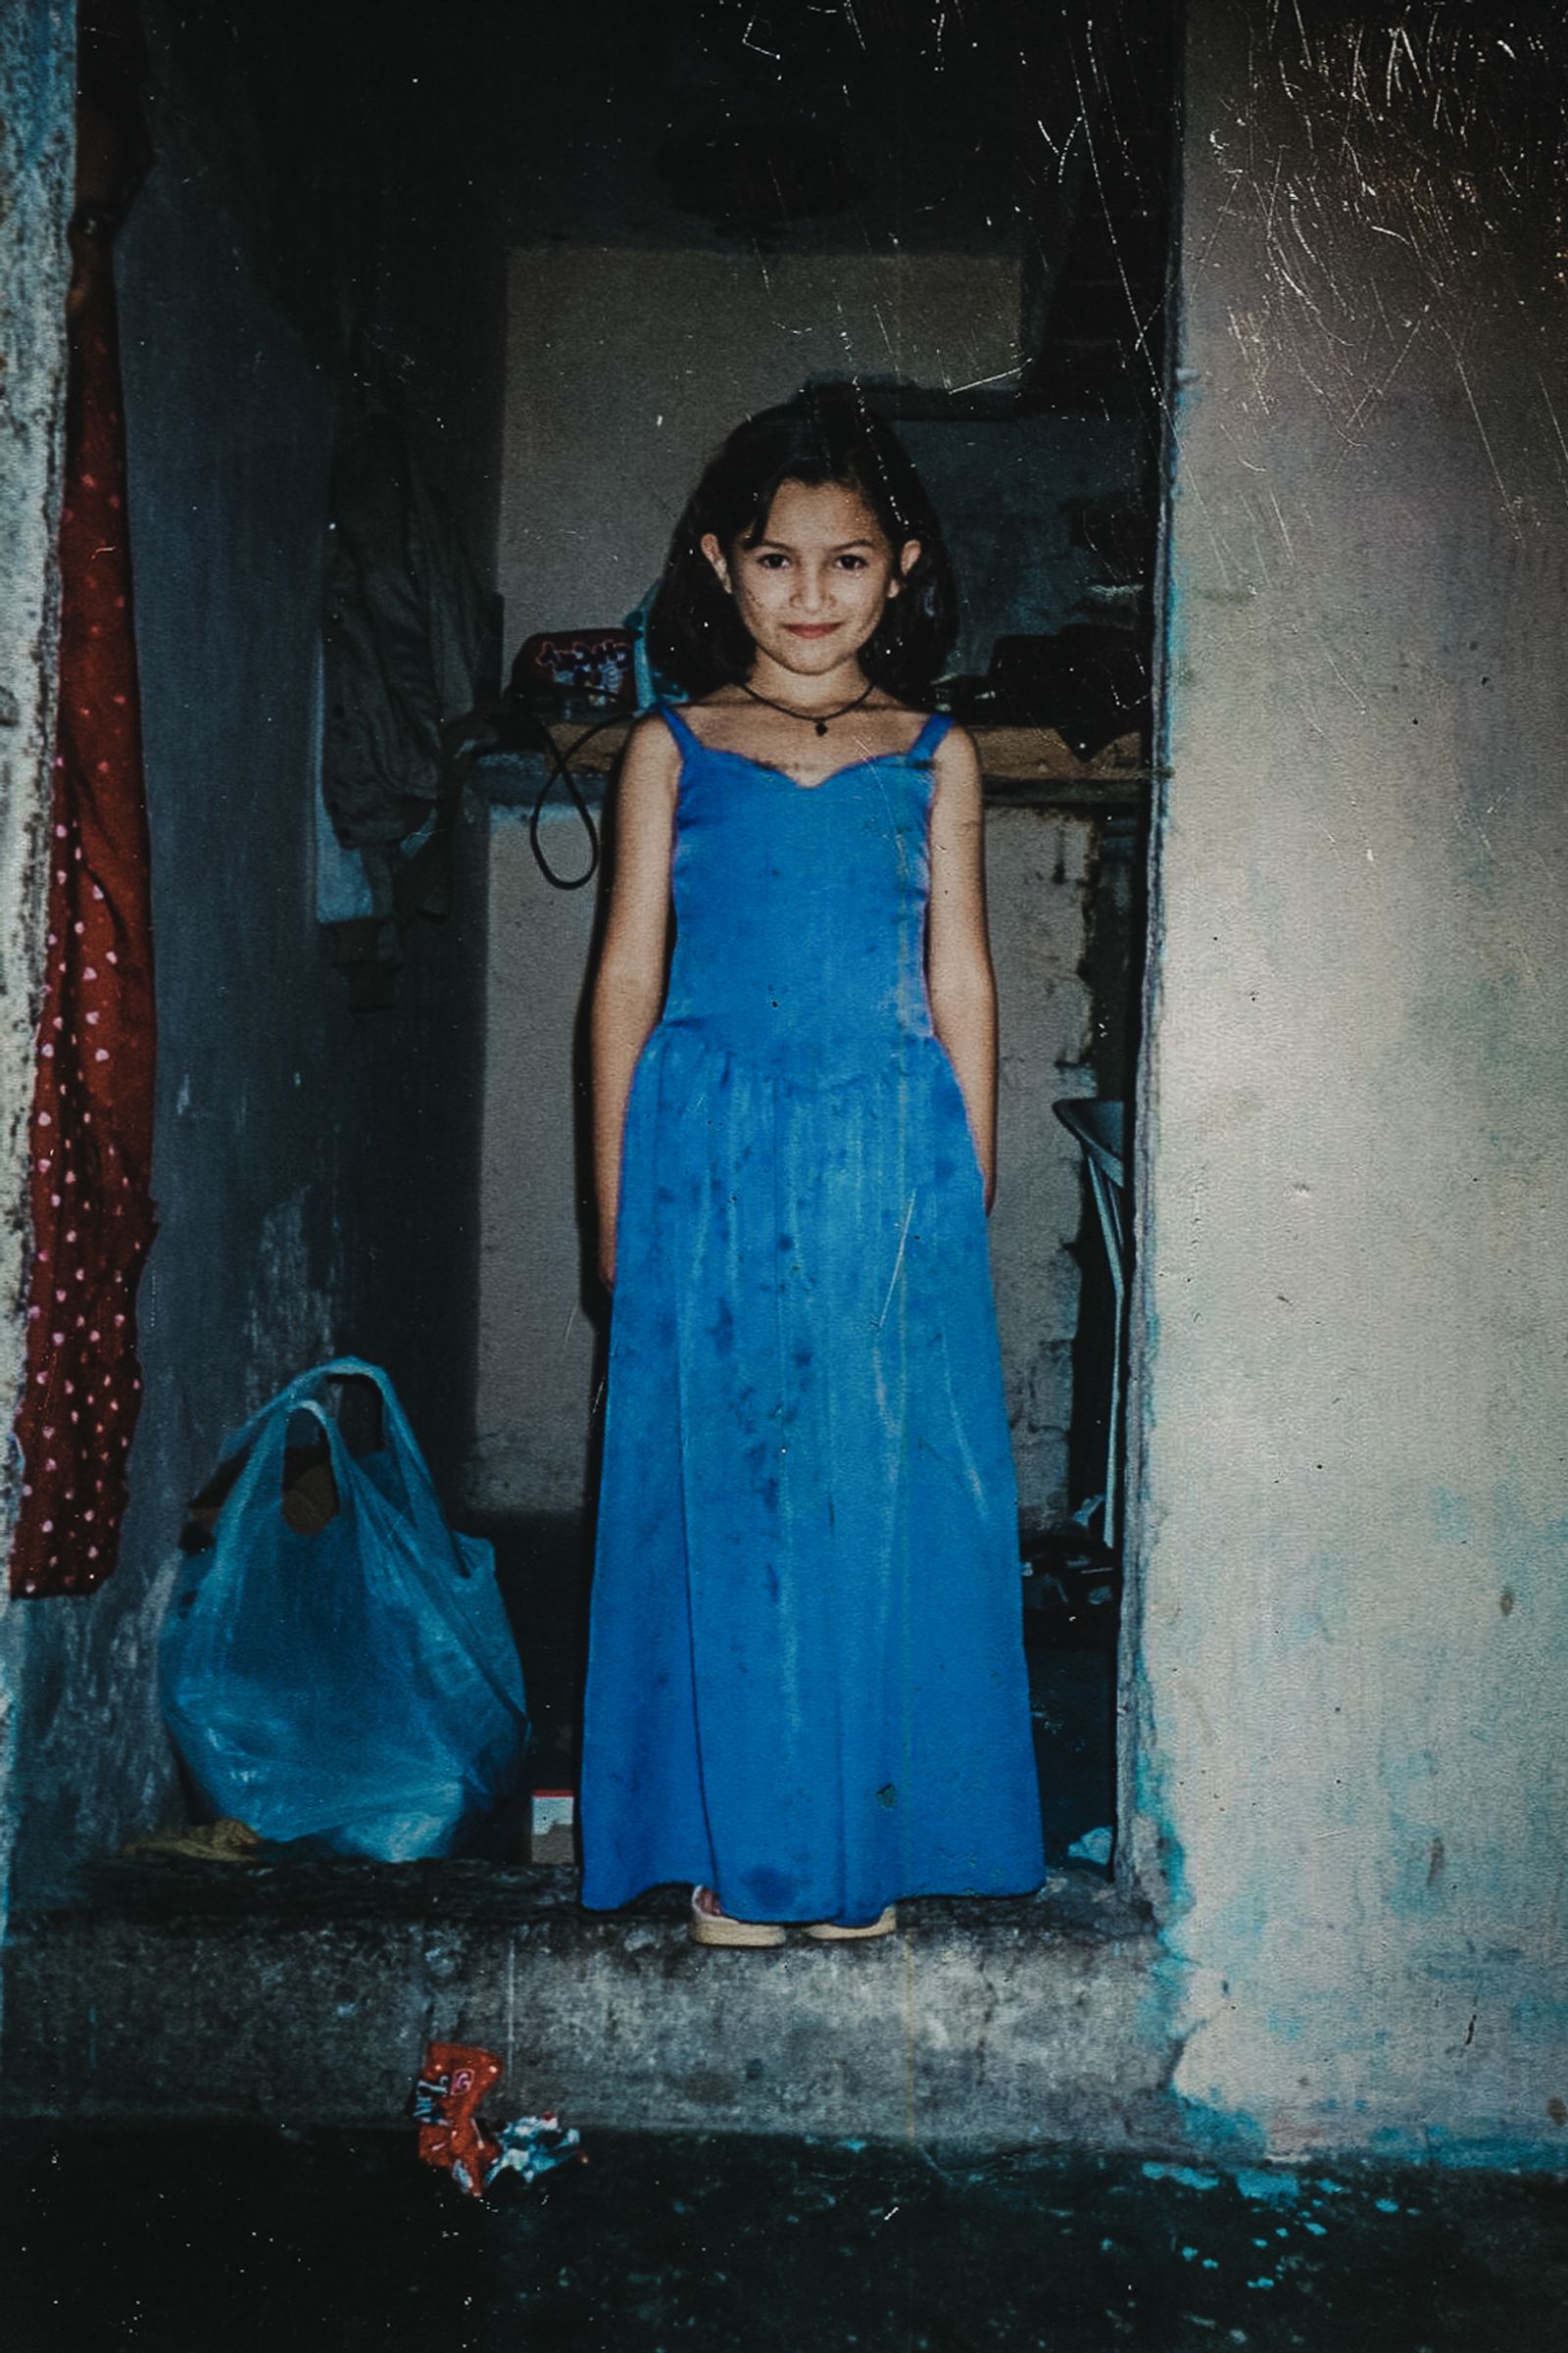 © Mariceu Erthal Garcia - Portrait of Reyna, during the time she was abused. Family file photo.